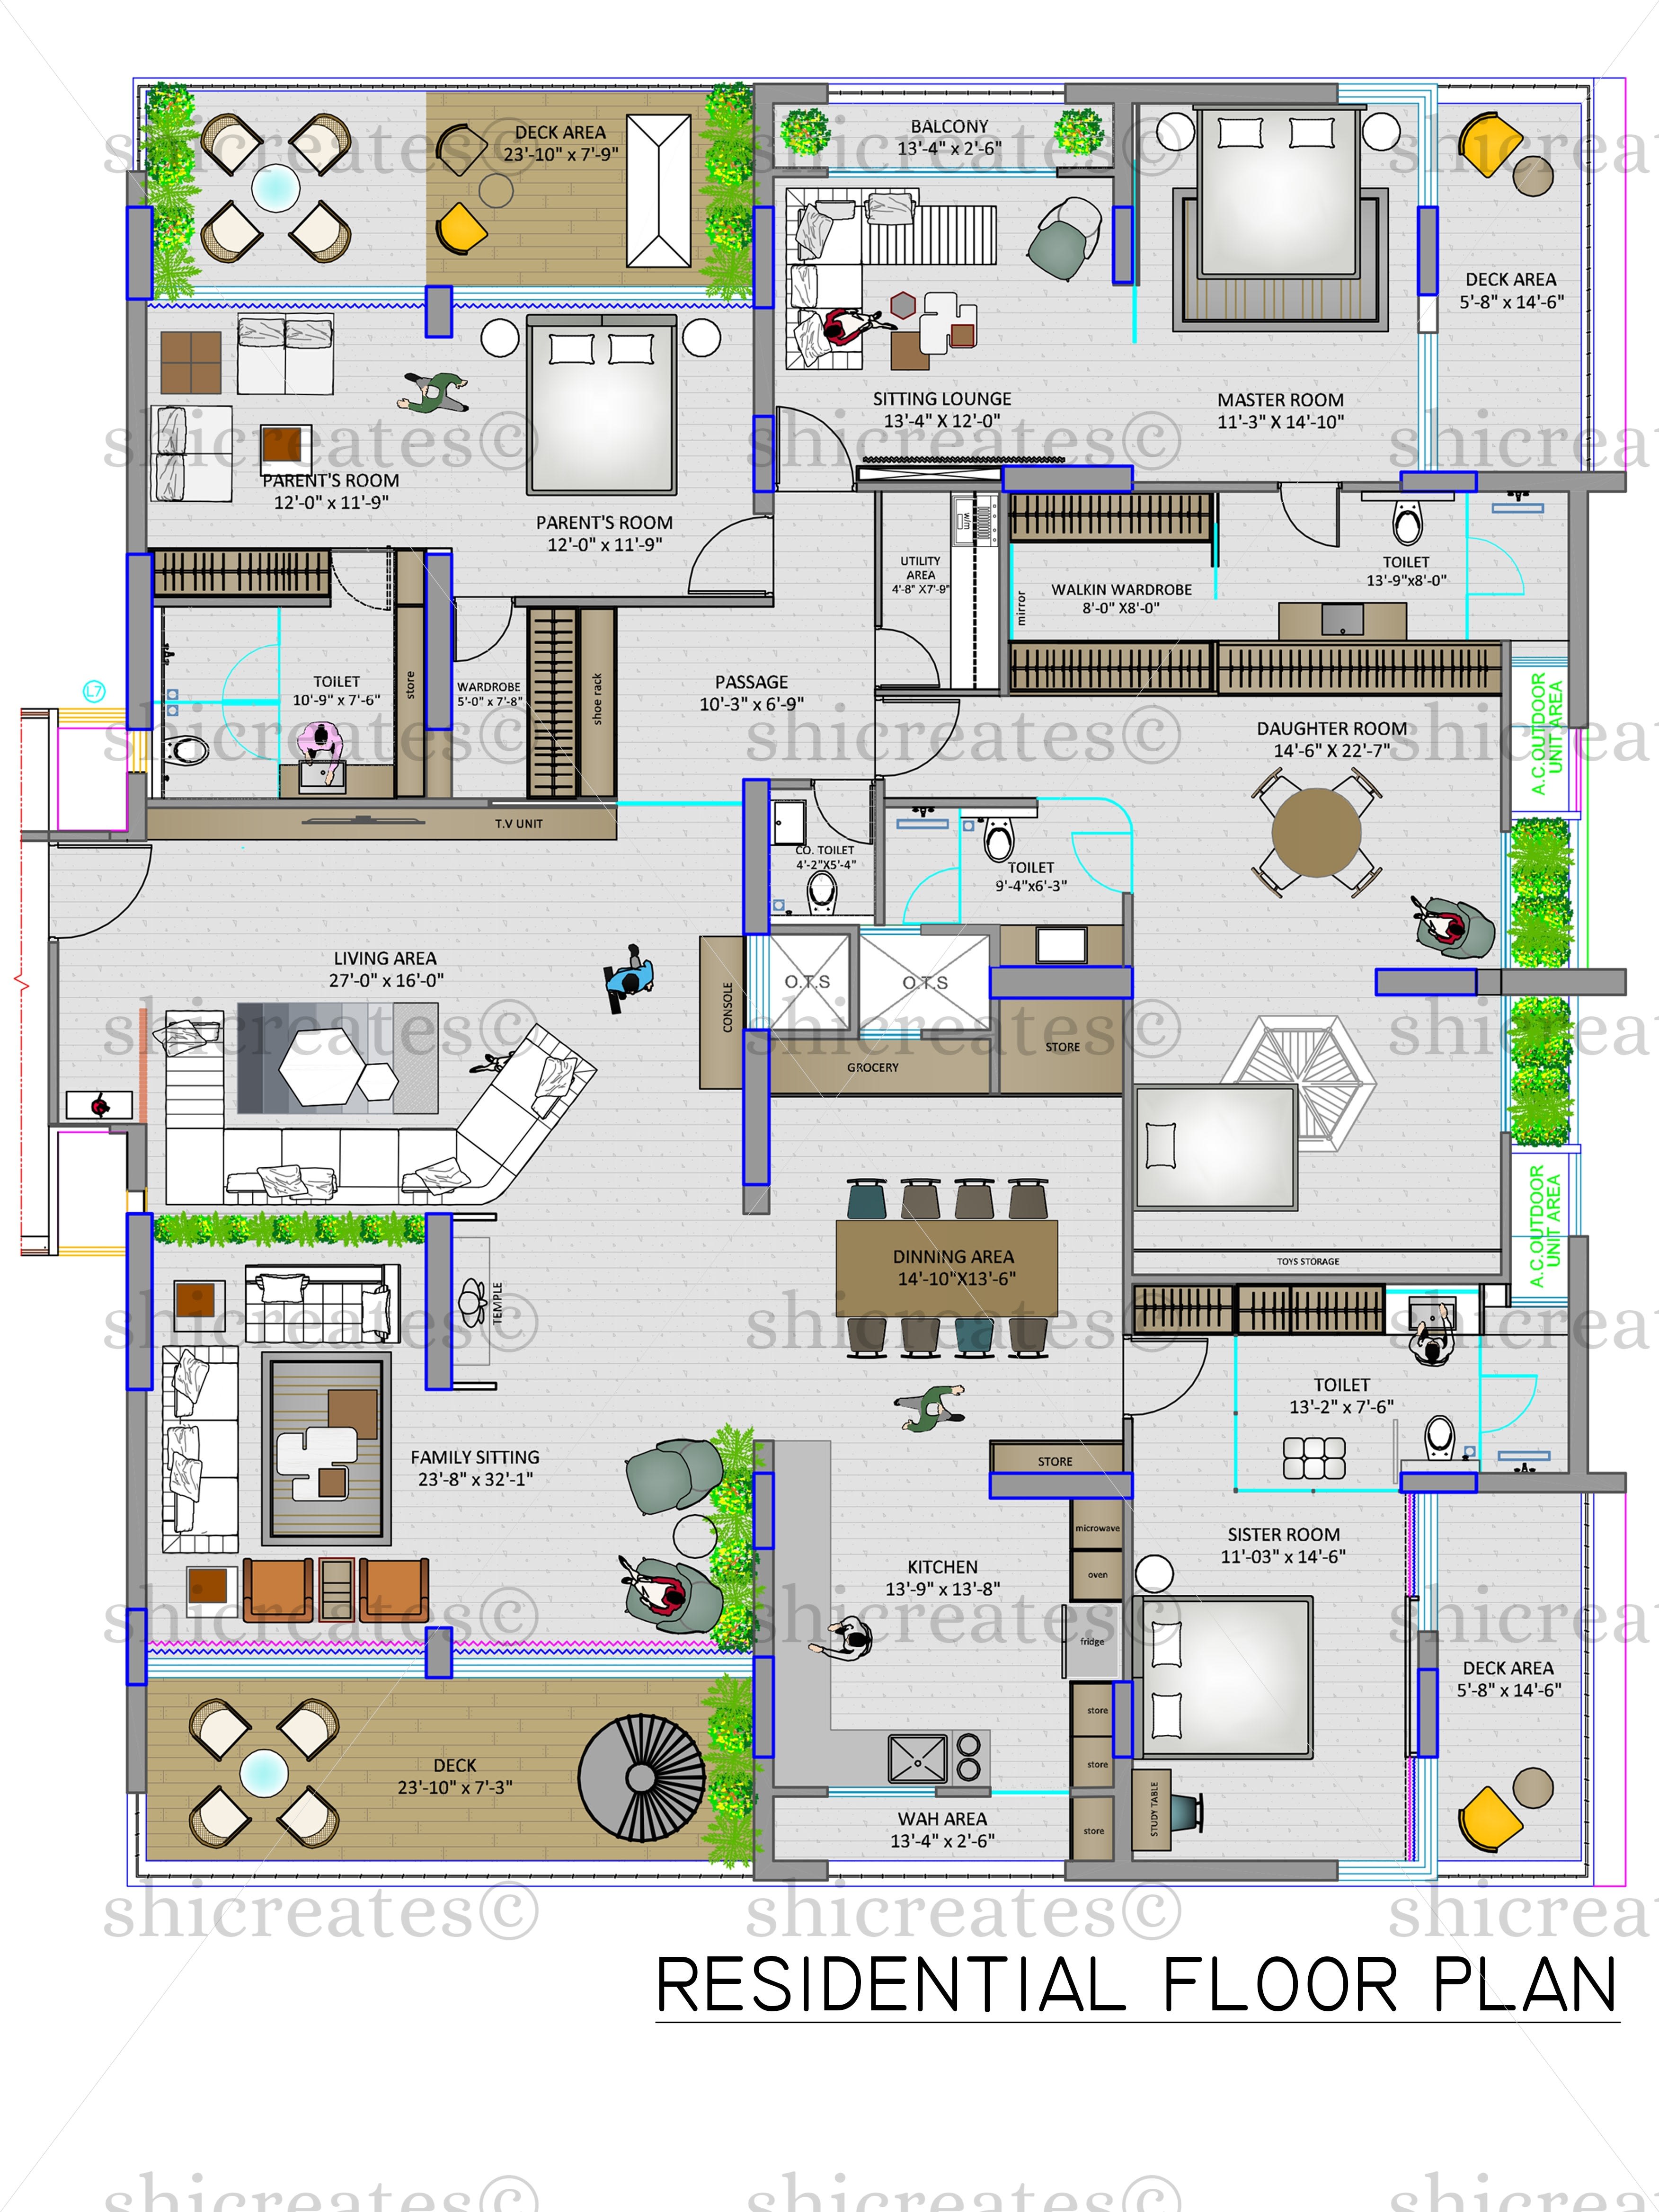 Be Making Floor Plans By Shicreates